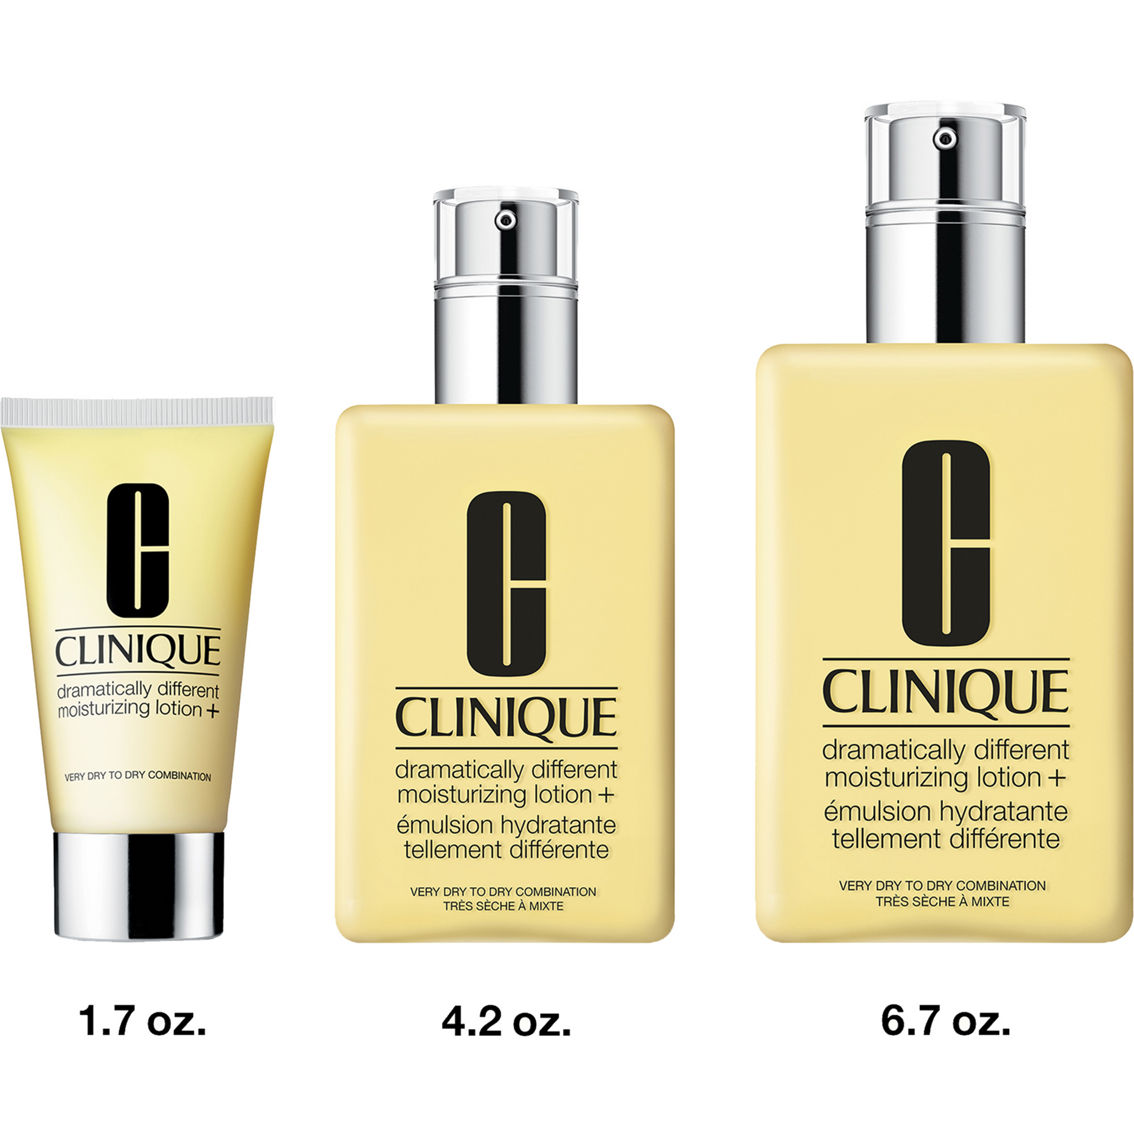 Clinique Jumbo Dramatically Different™ Moisturizing Lotion+ - Image 2 of 7